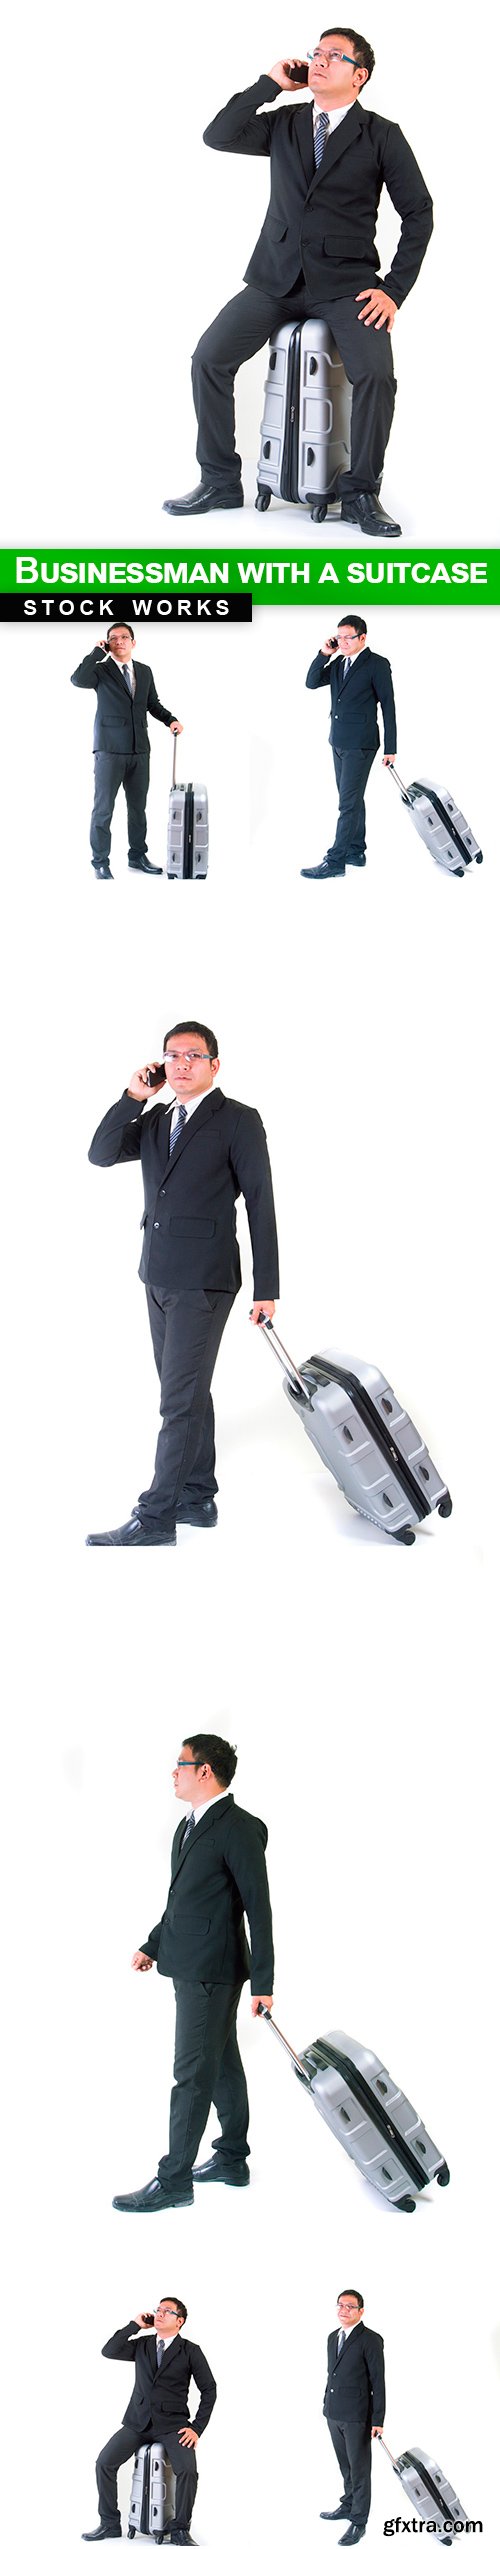 Businessman with a suitcase - 6 UHQ JPEG